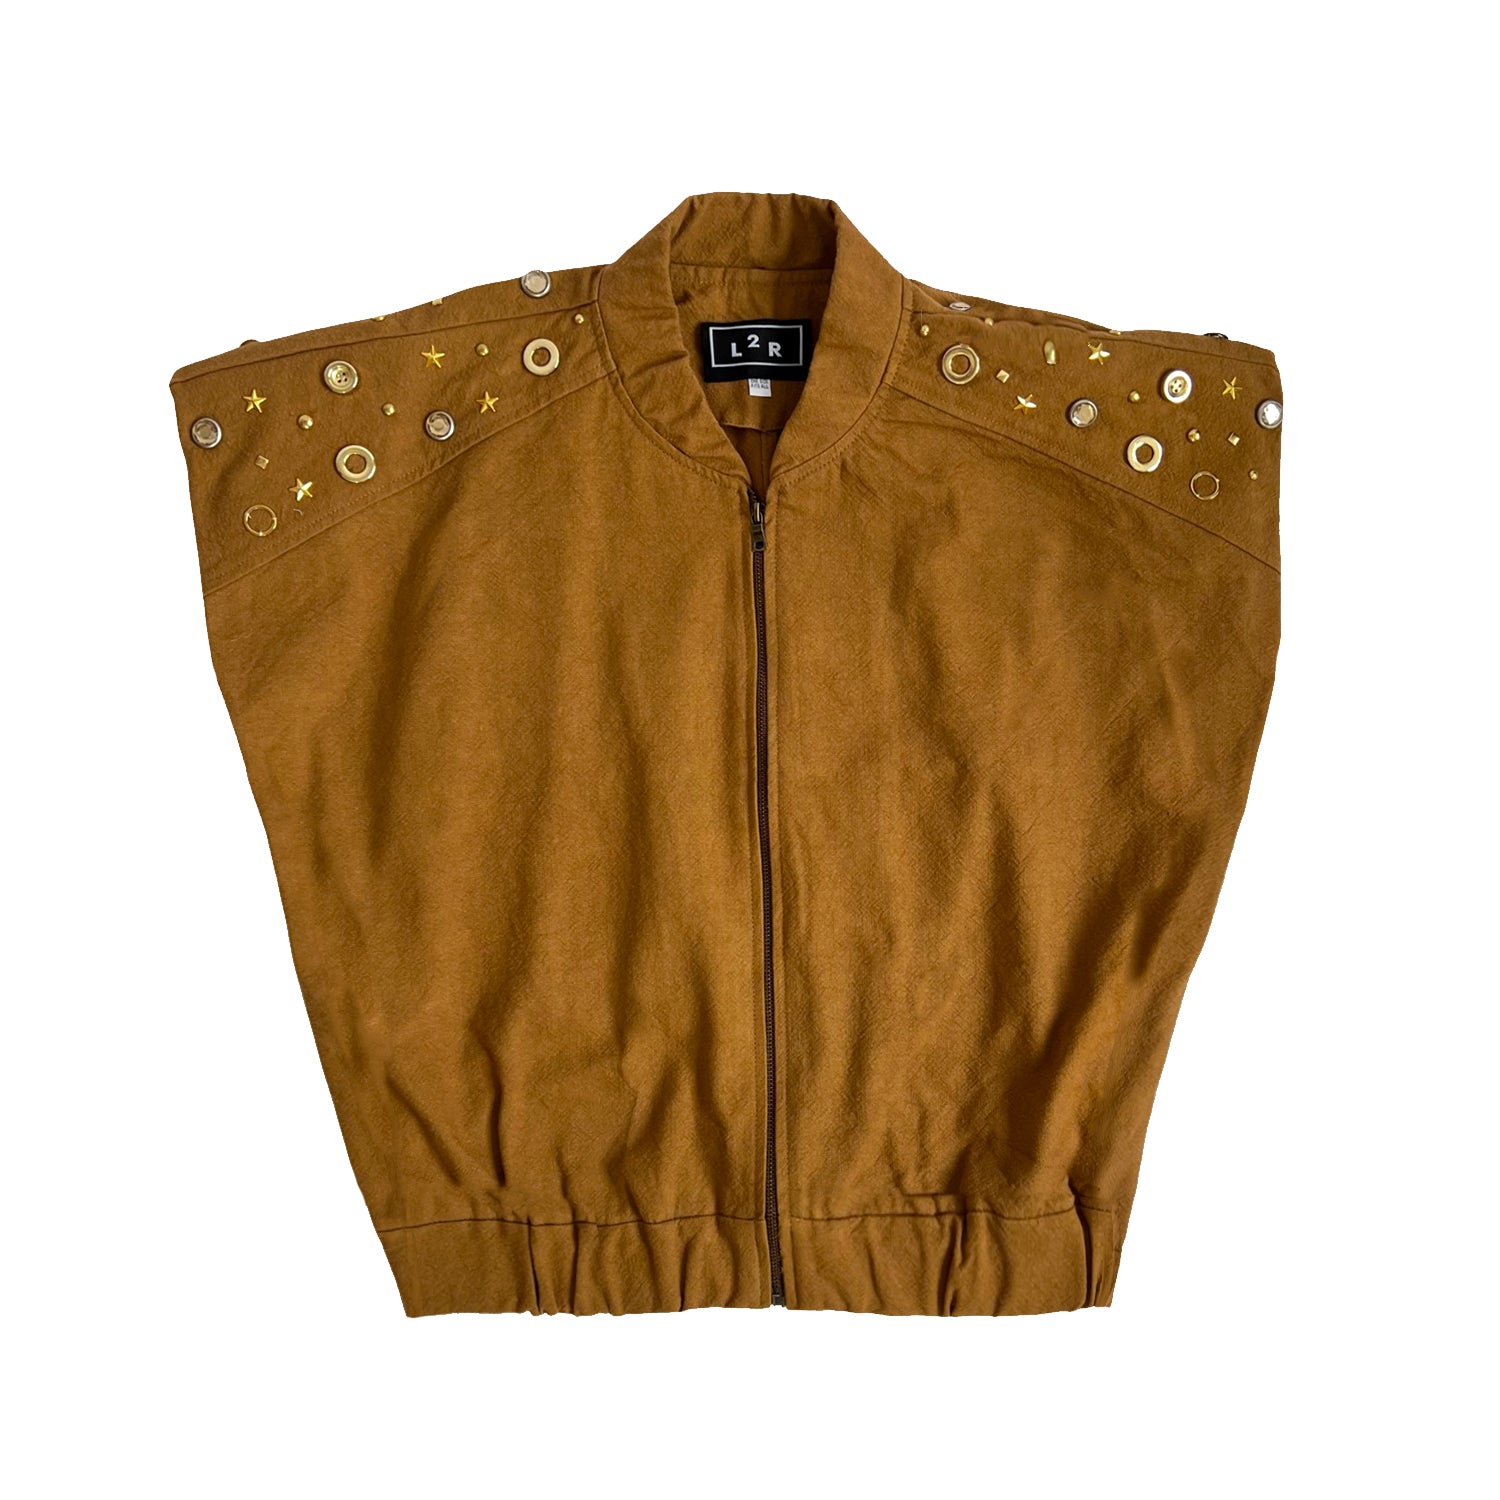 L2r The Label Women's Studded Sleeveless Bomber Jacket In Tan Brown